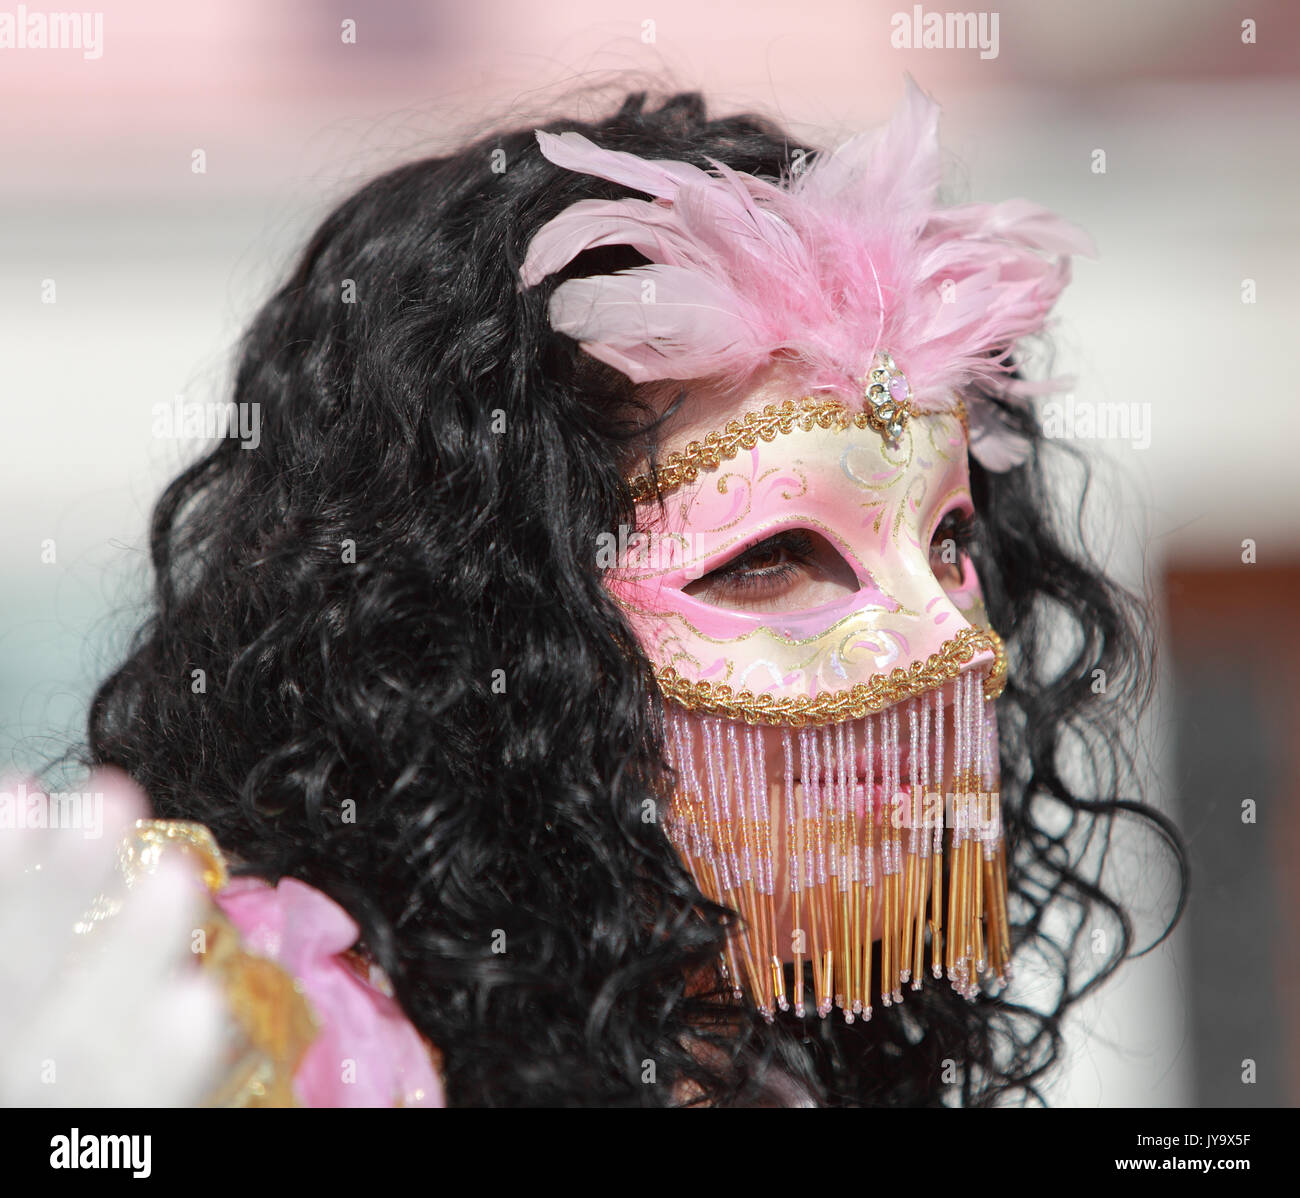 Venice,Italy-February 26th, 2011: Close-up of a woman wearing a Venetian disguise during the Carnival days.The Carnival of Venice (Carnevale di Venezi Stock Photo